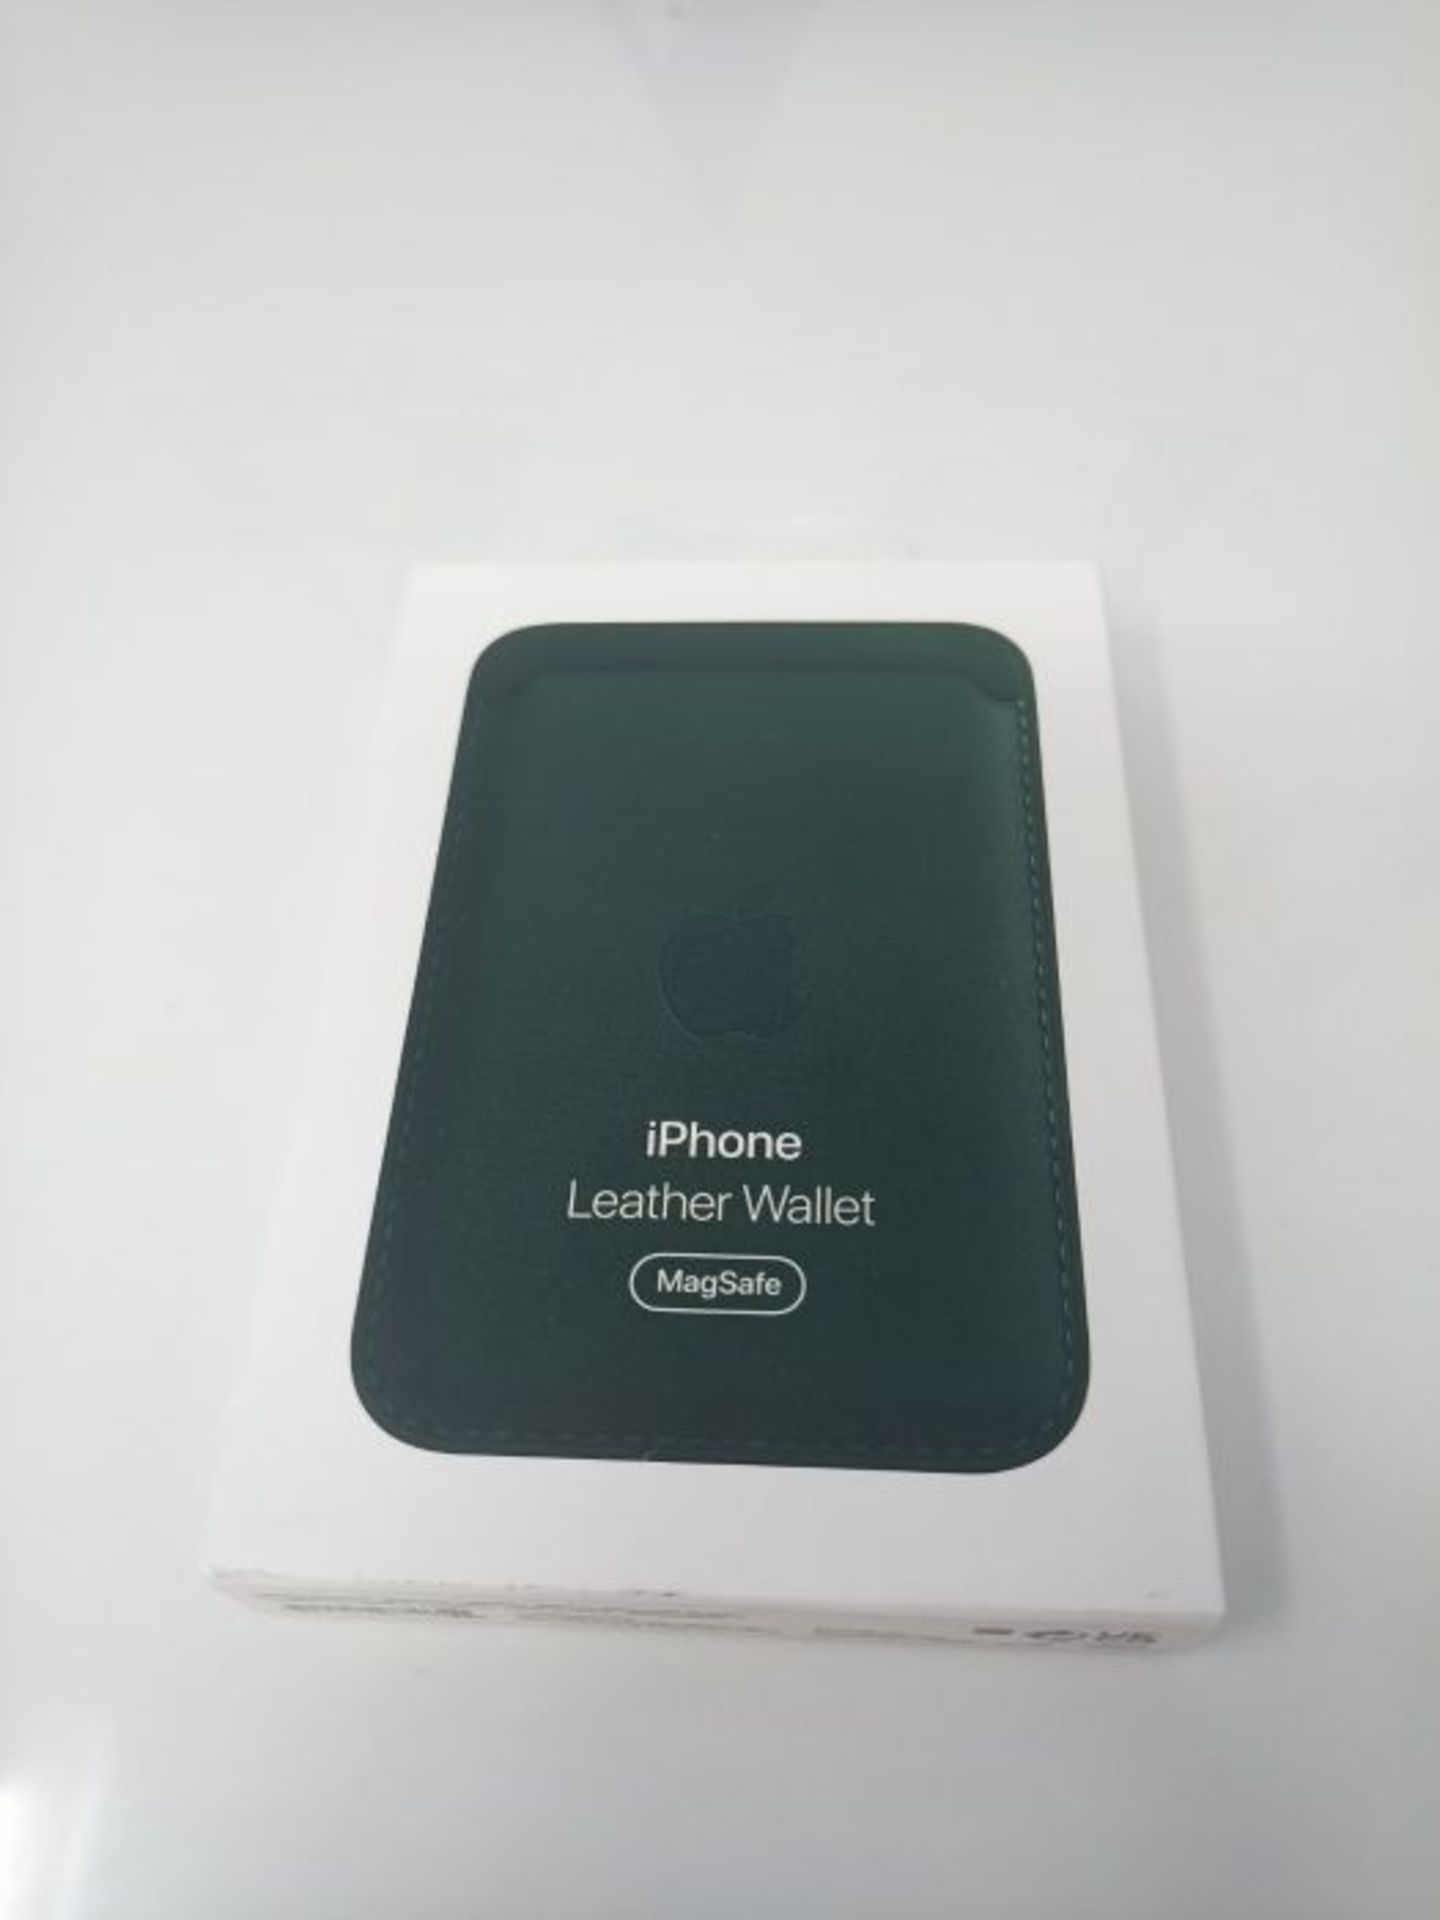 Apple Leather Wallet with MagSafe (for iPhone) - Sequoia Green - Image 2 of 3